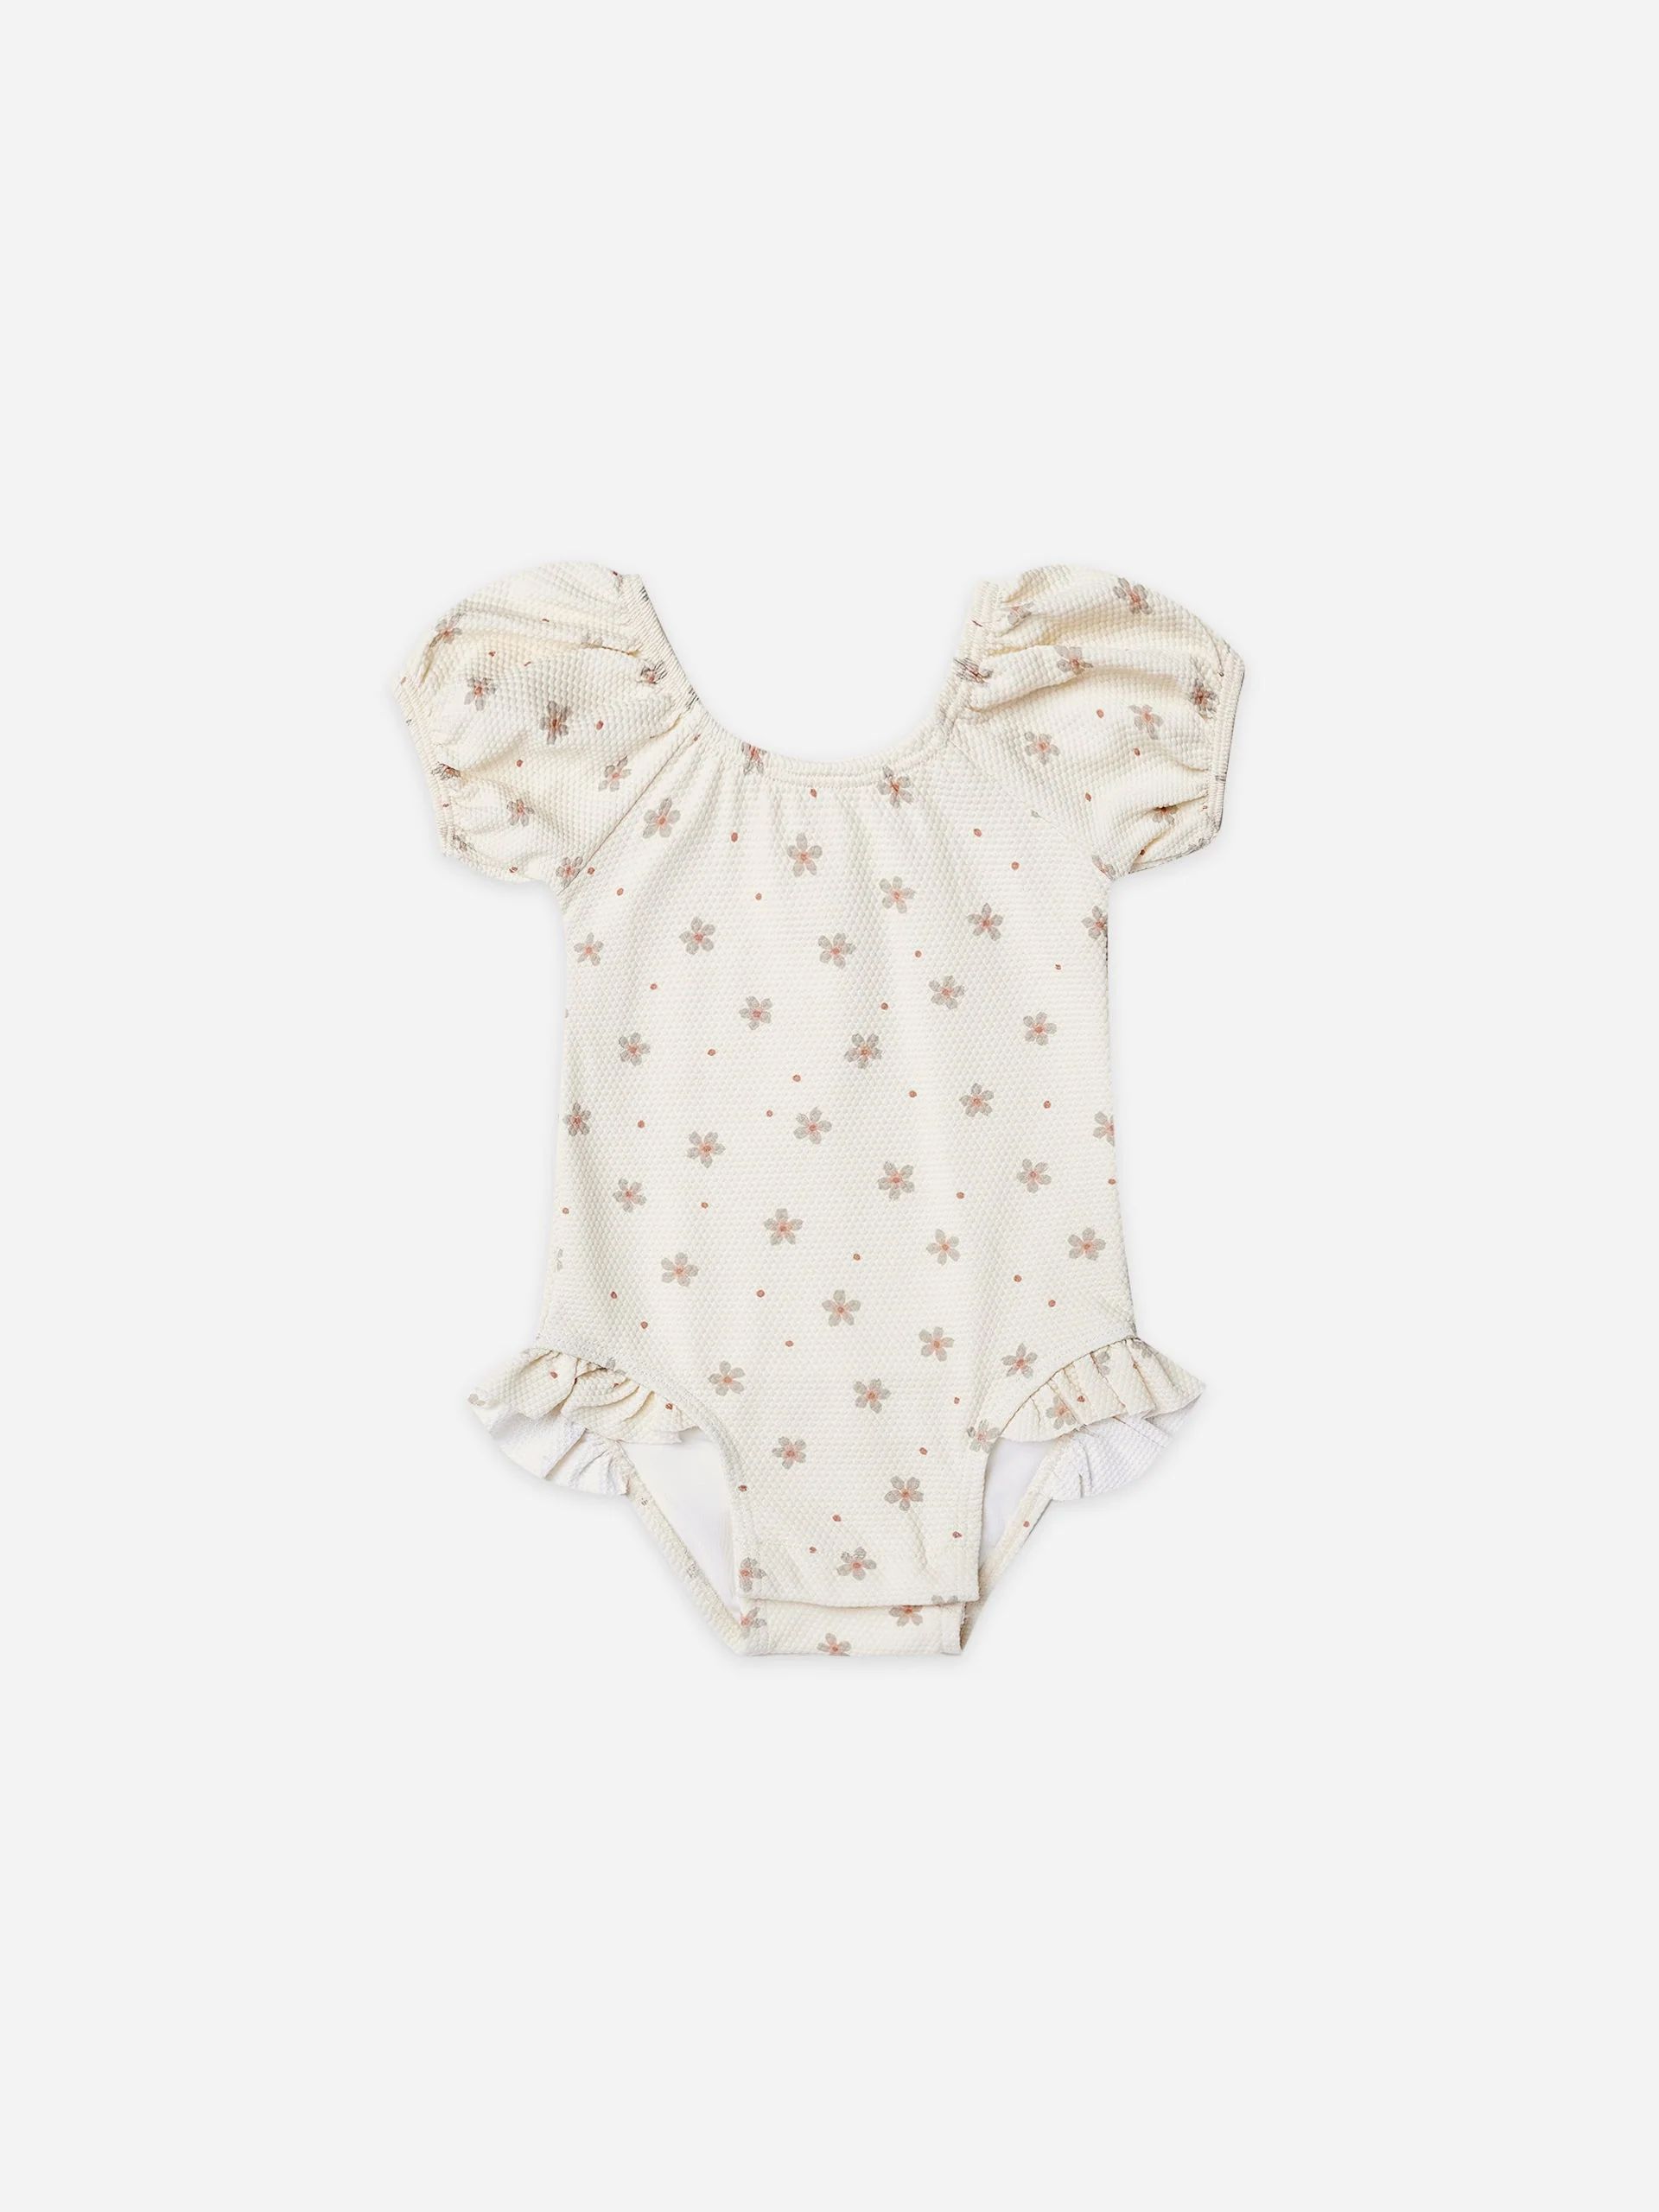 Catalina One-Piece Swimsuit | Dotty Floral | Rylee + Cru